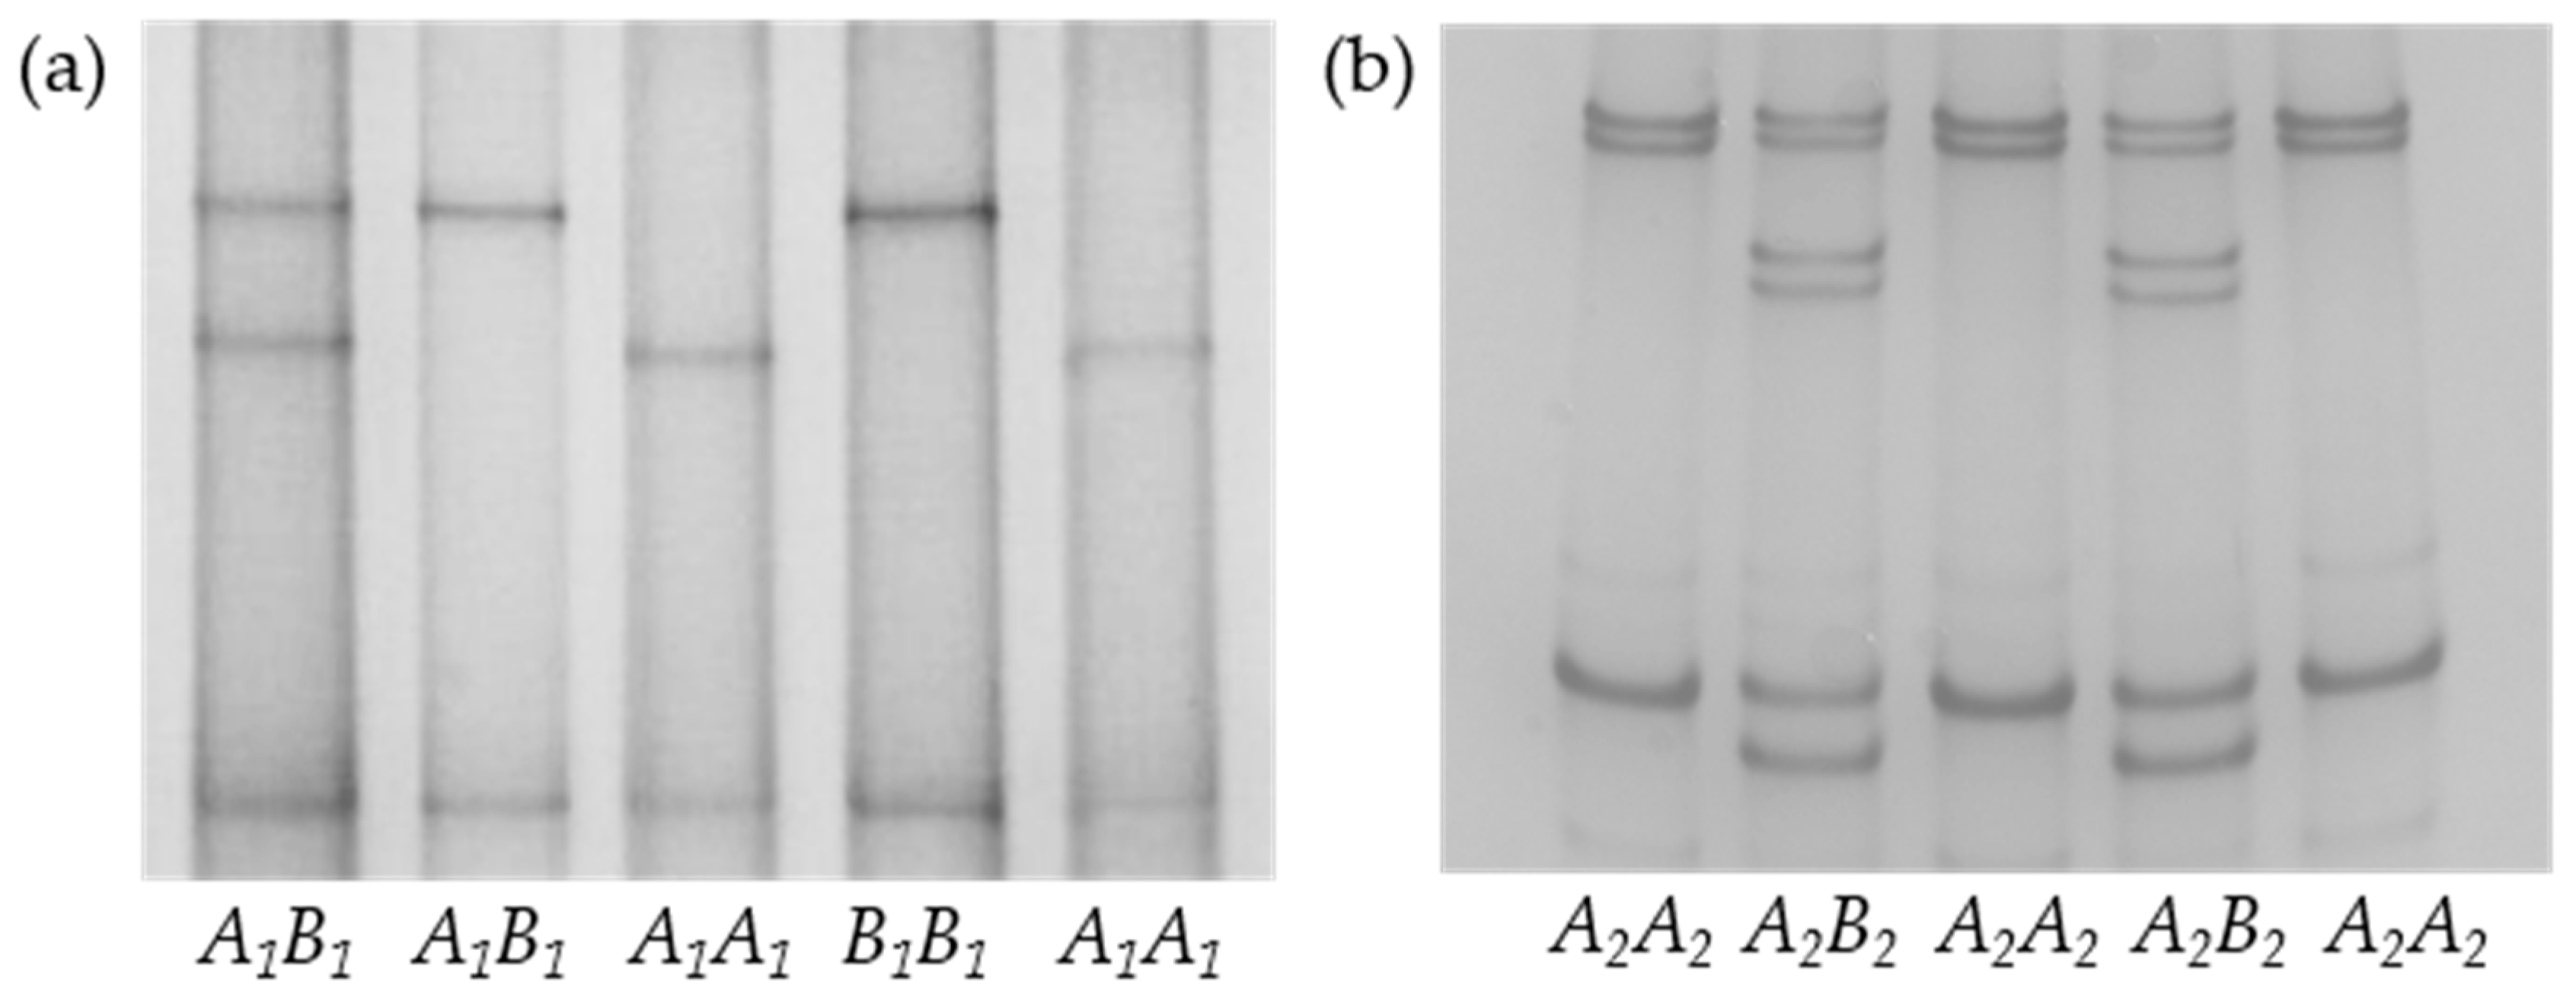 Animals | Free Full-Text | Variation in the Fatty Acid Synthase Gene (FASN)  and Its Association with Milk Traits in Gannan Yaks | HTML